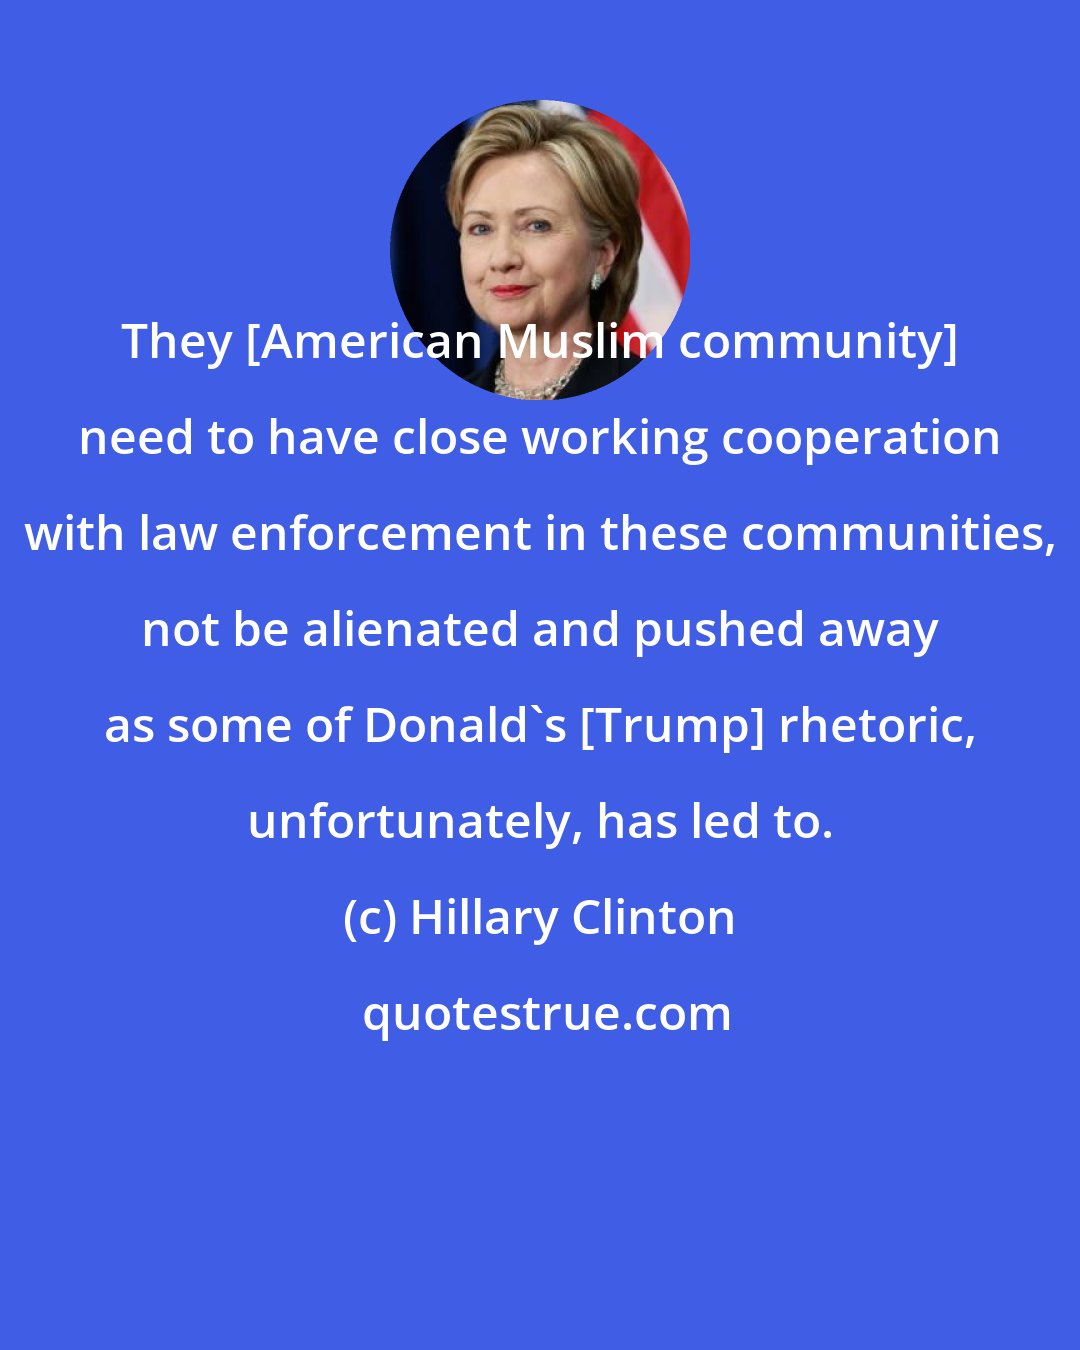 Hillary Clinton: They [American Muslim community] need to have close working cooperation with law enforcement in these communities, not be alienated and pushed away as some of Donald's [Trump] rhetoric, unfortunately, has led to.